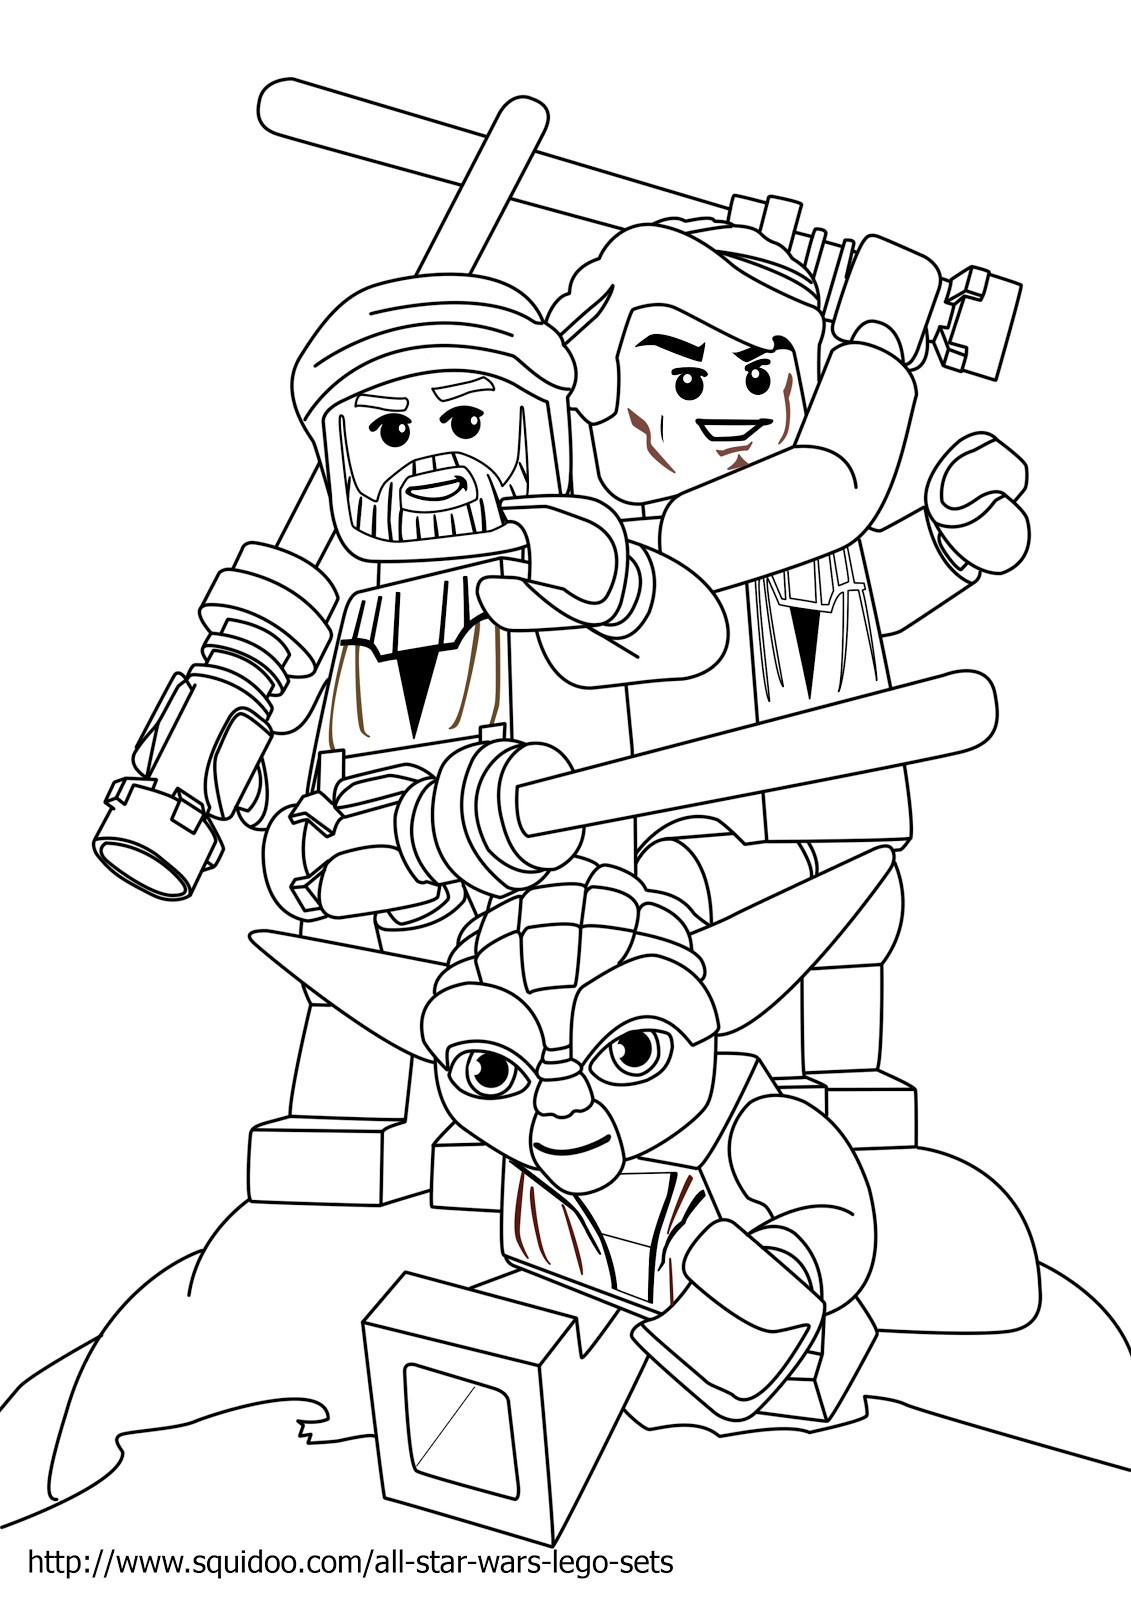 Lego Star Wars Coloring Pages
 Free Coloring Pages Lego Star Wars